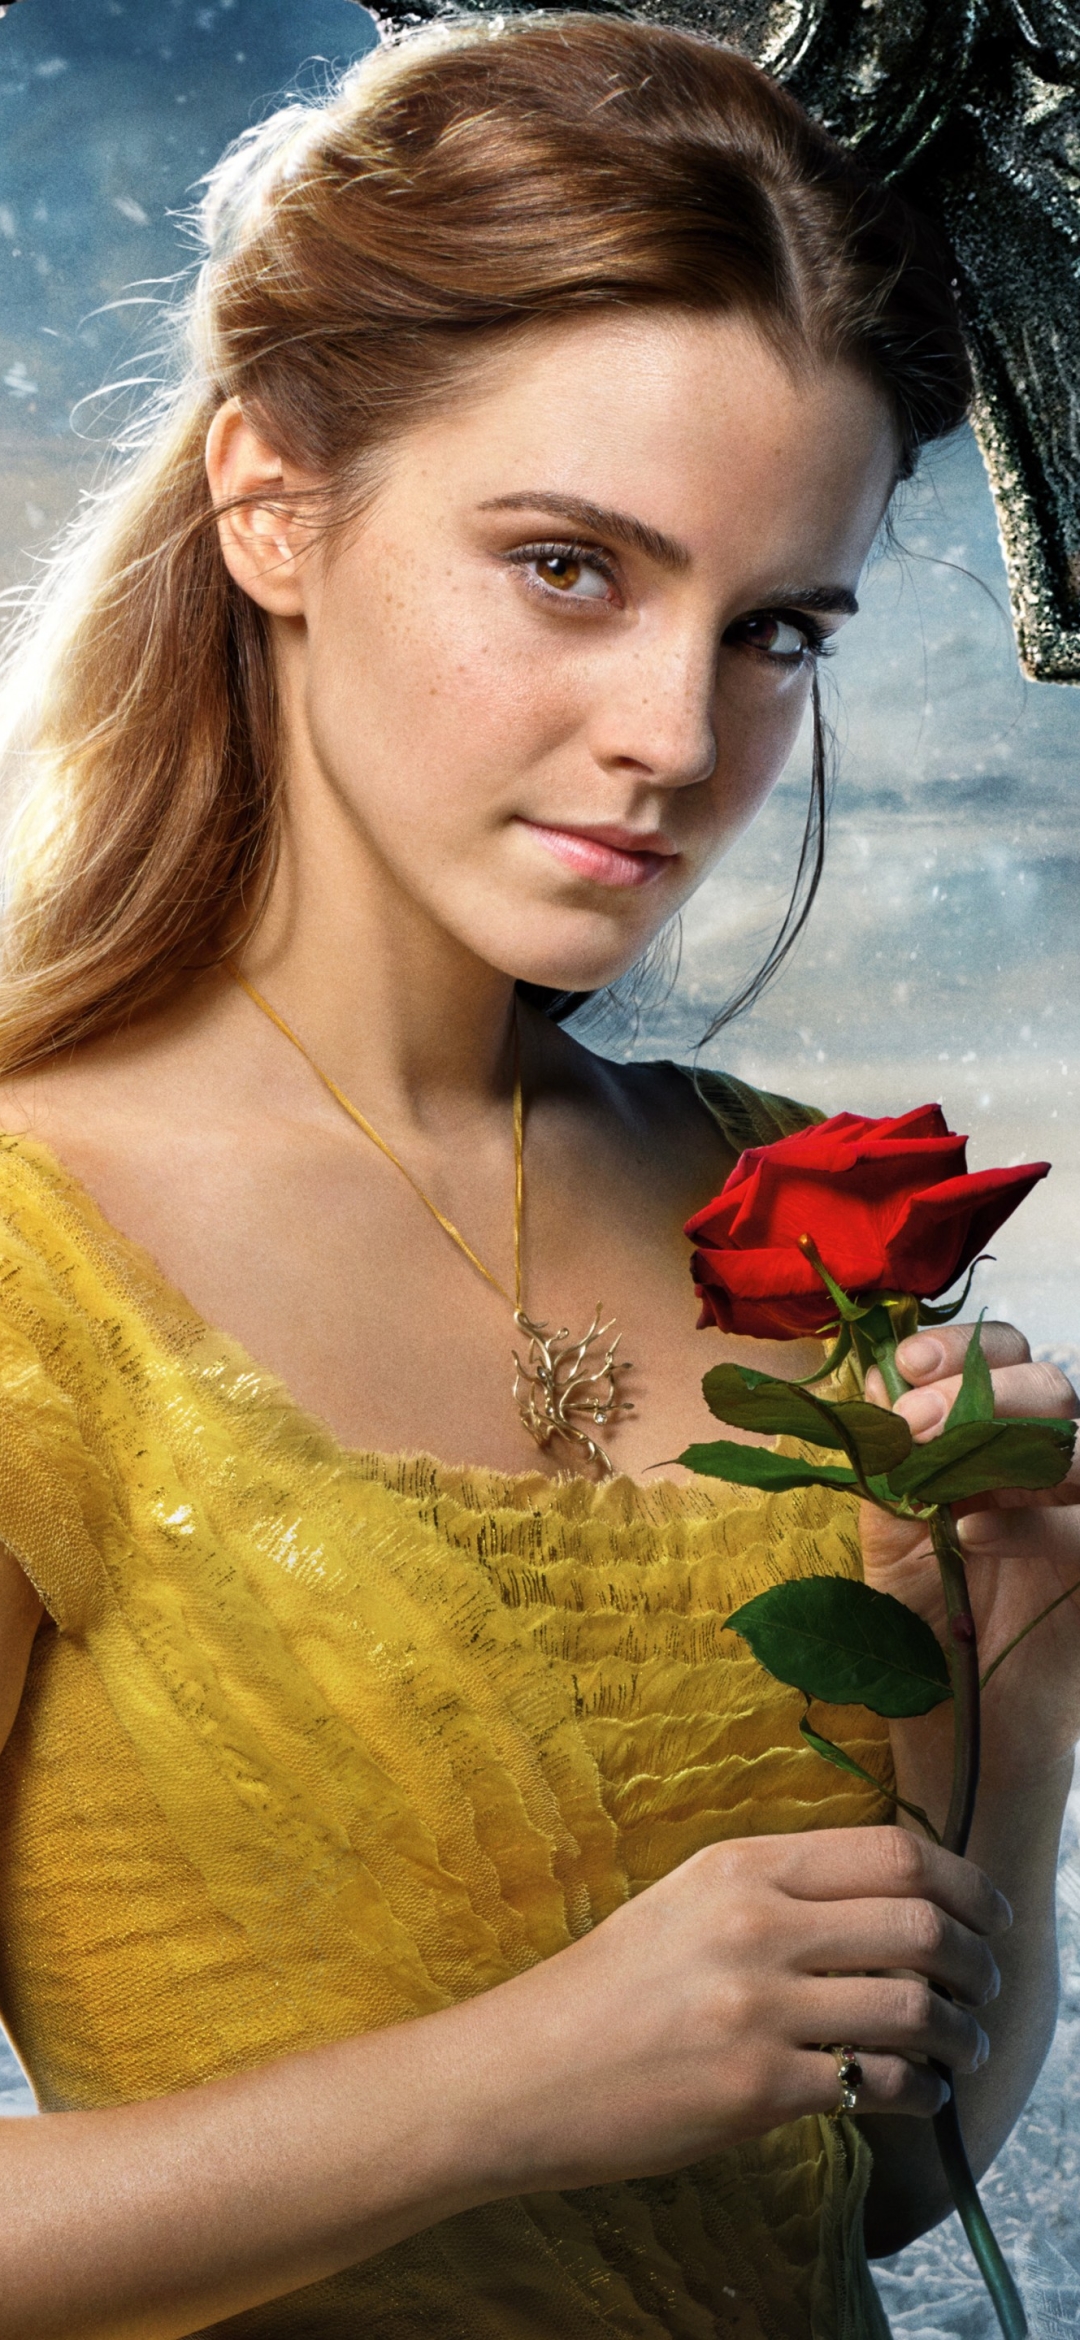 emma watson, beauty and the beast (2017), movie, rose wallpapers for tablet